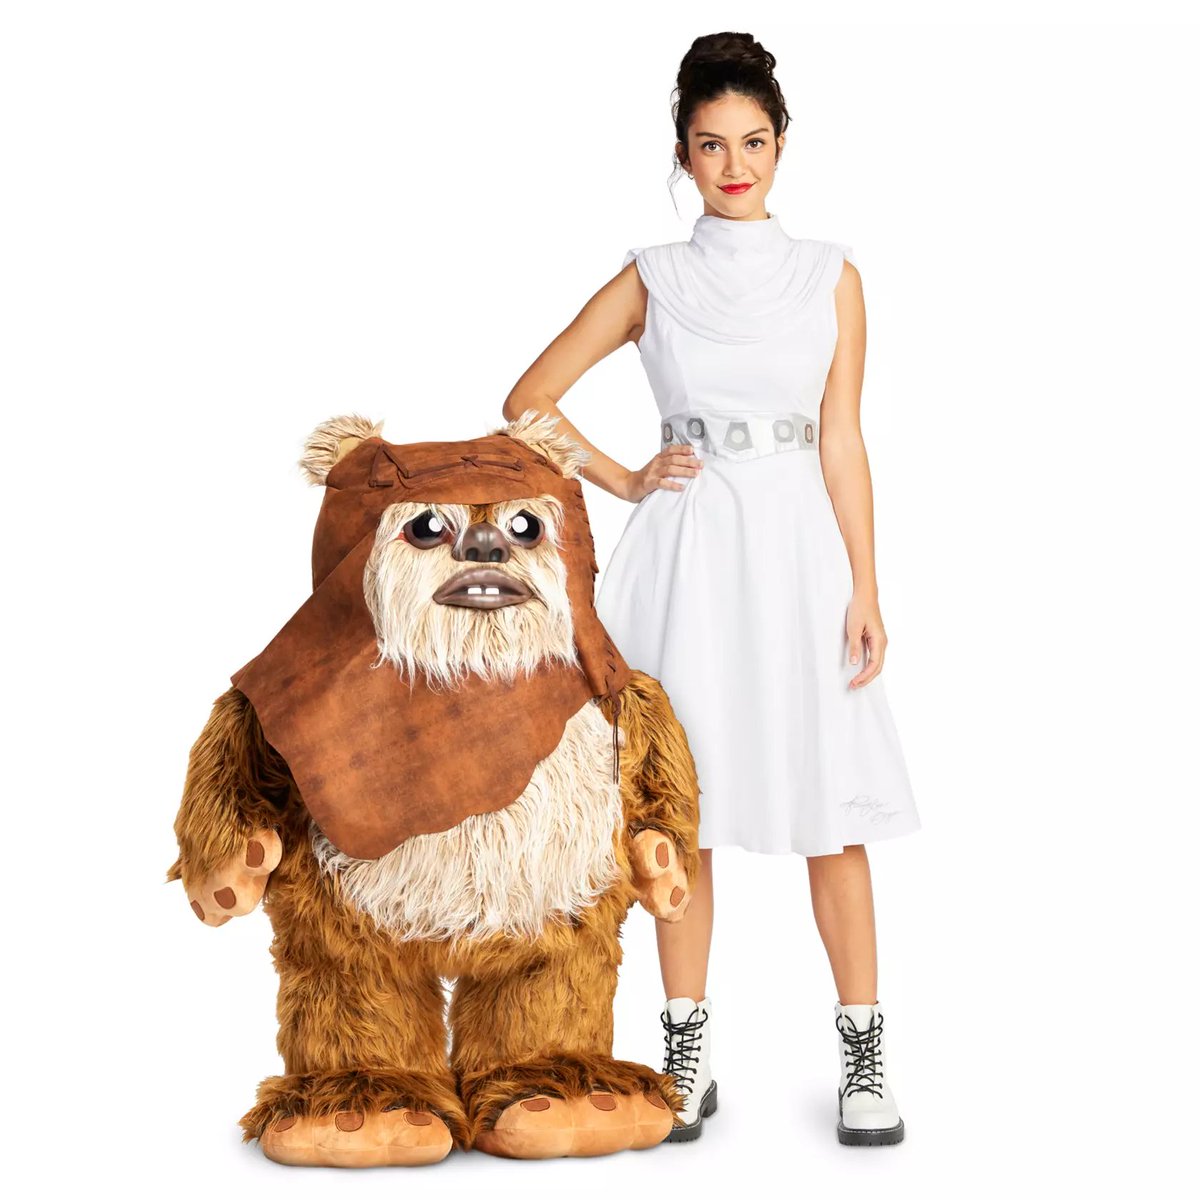 Available Now: Wicket Ewok Collectors Figure - Star Wars: Return of the Jedi – 40th Anniversary at Disney Link: finderz.info/44tfpie #Ad #Disney #StarWars #Ewok #Wicket #MayThe4thBeWithYou #MayTheFourthBeWithYou